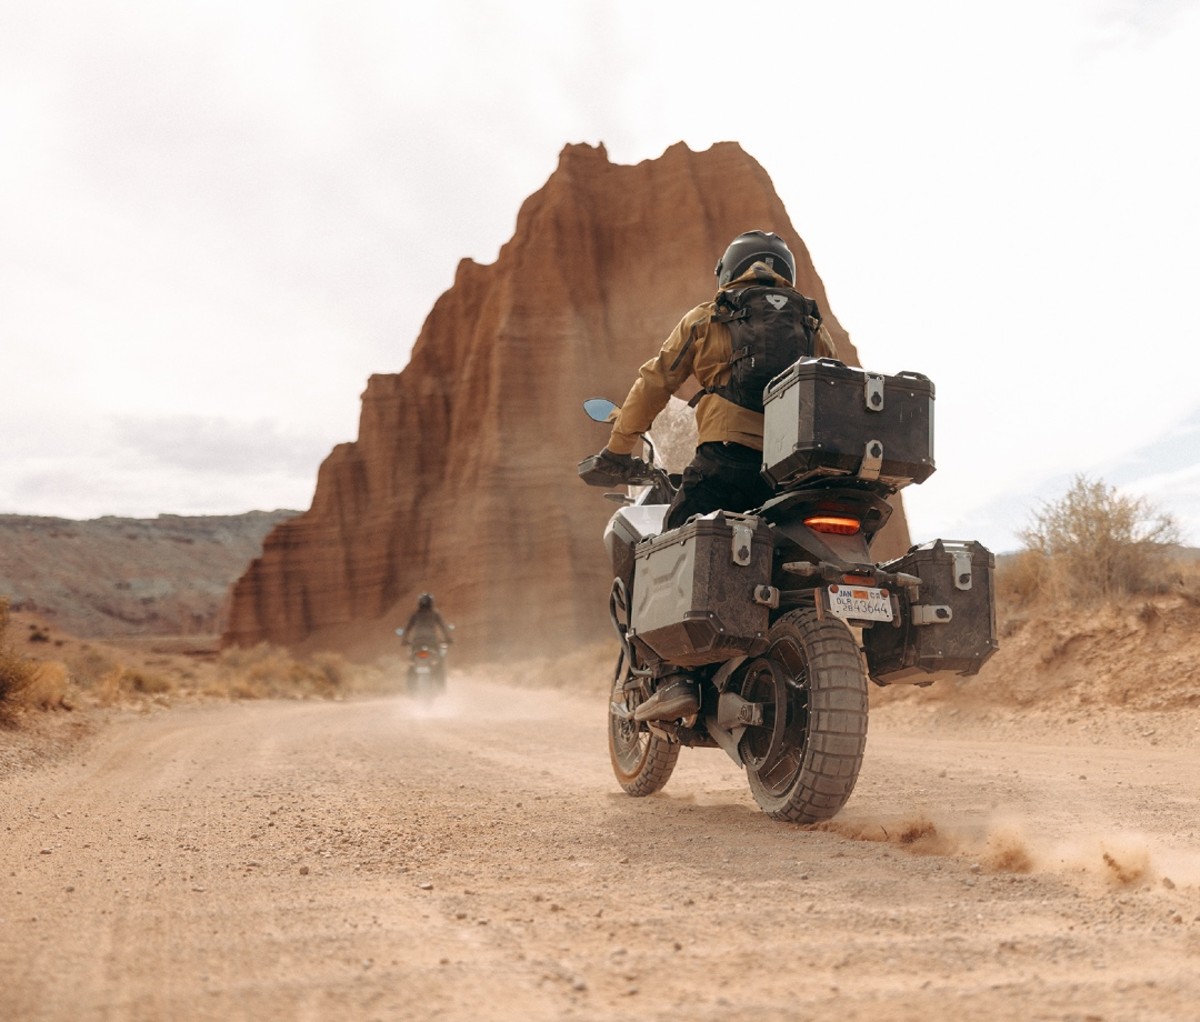 The Zero DSR/X is an all-electric adventure motorcycle made for dirt.